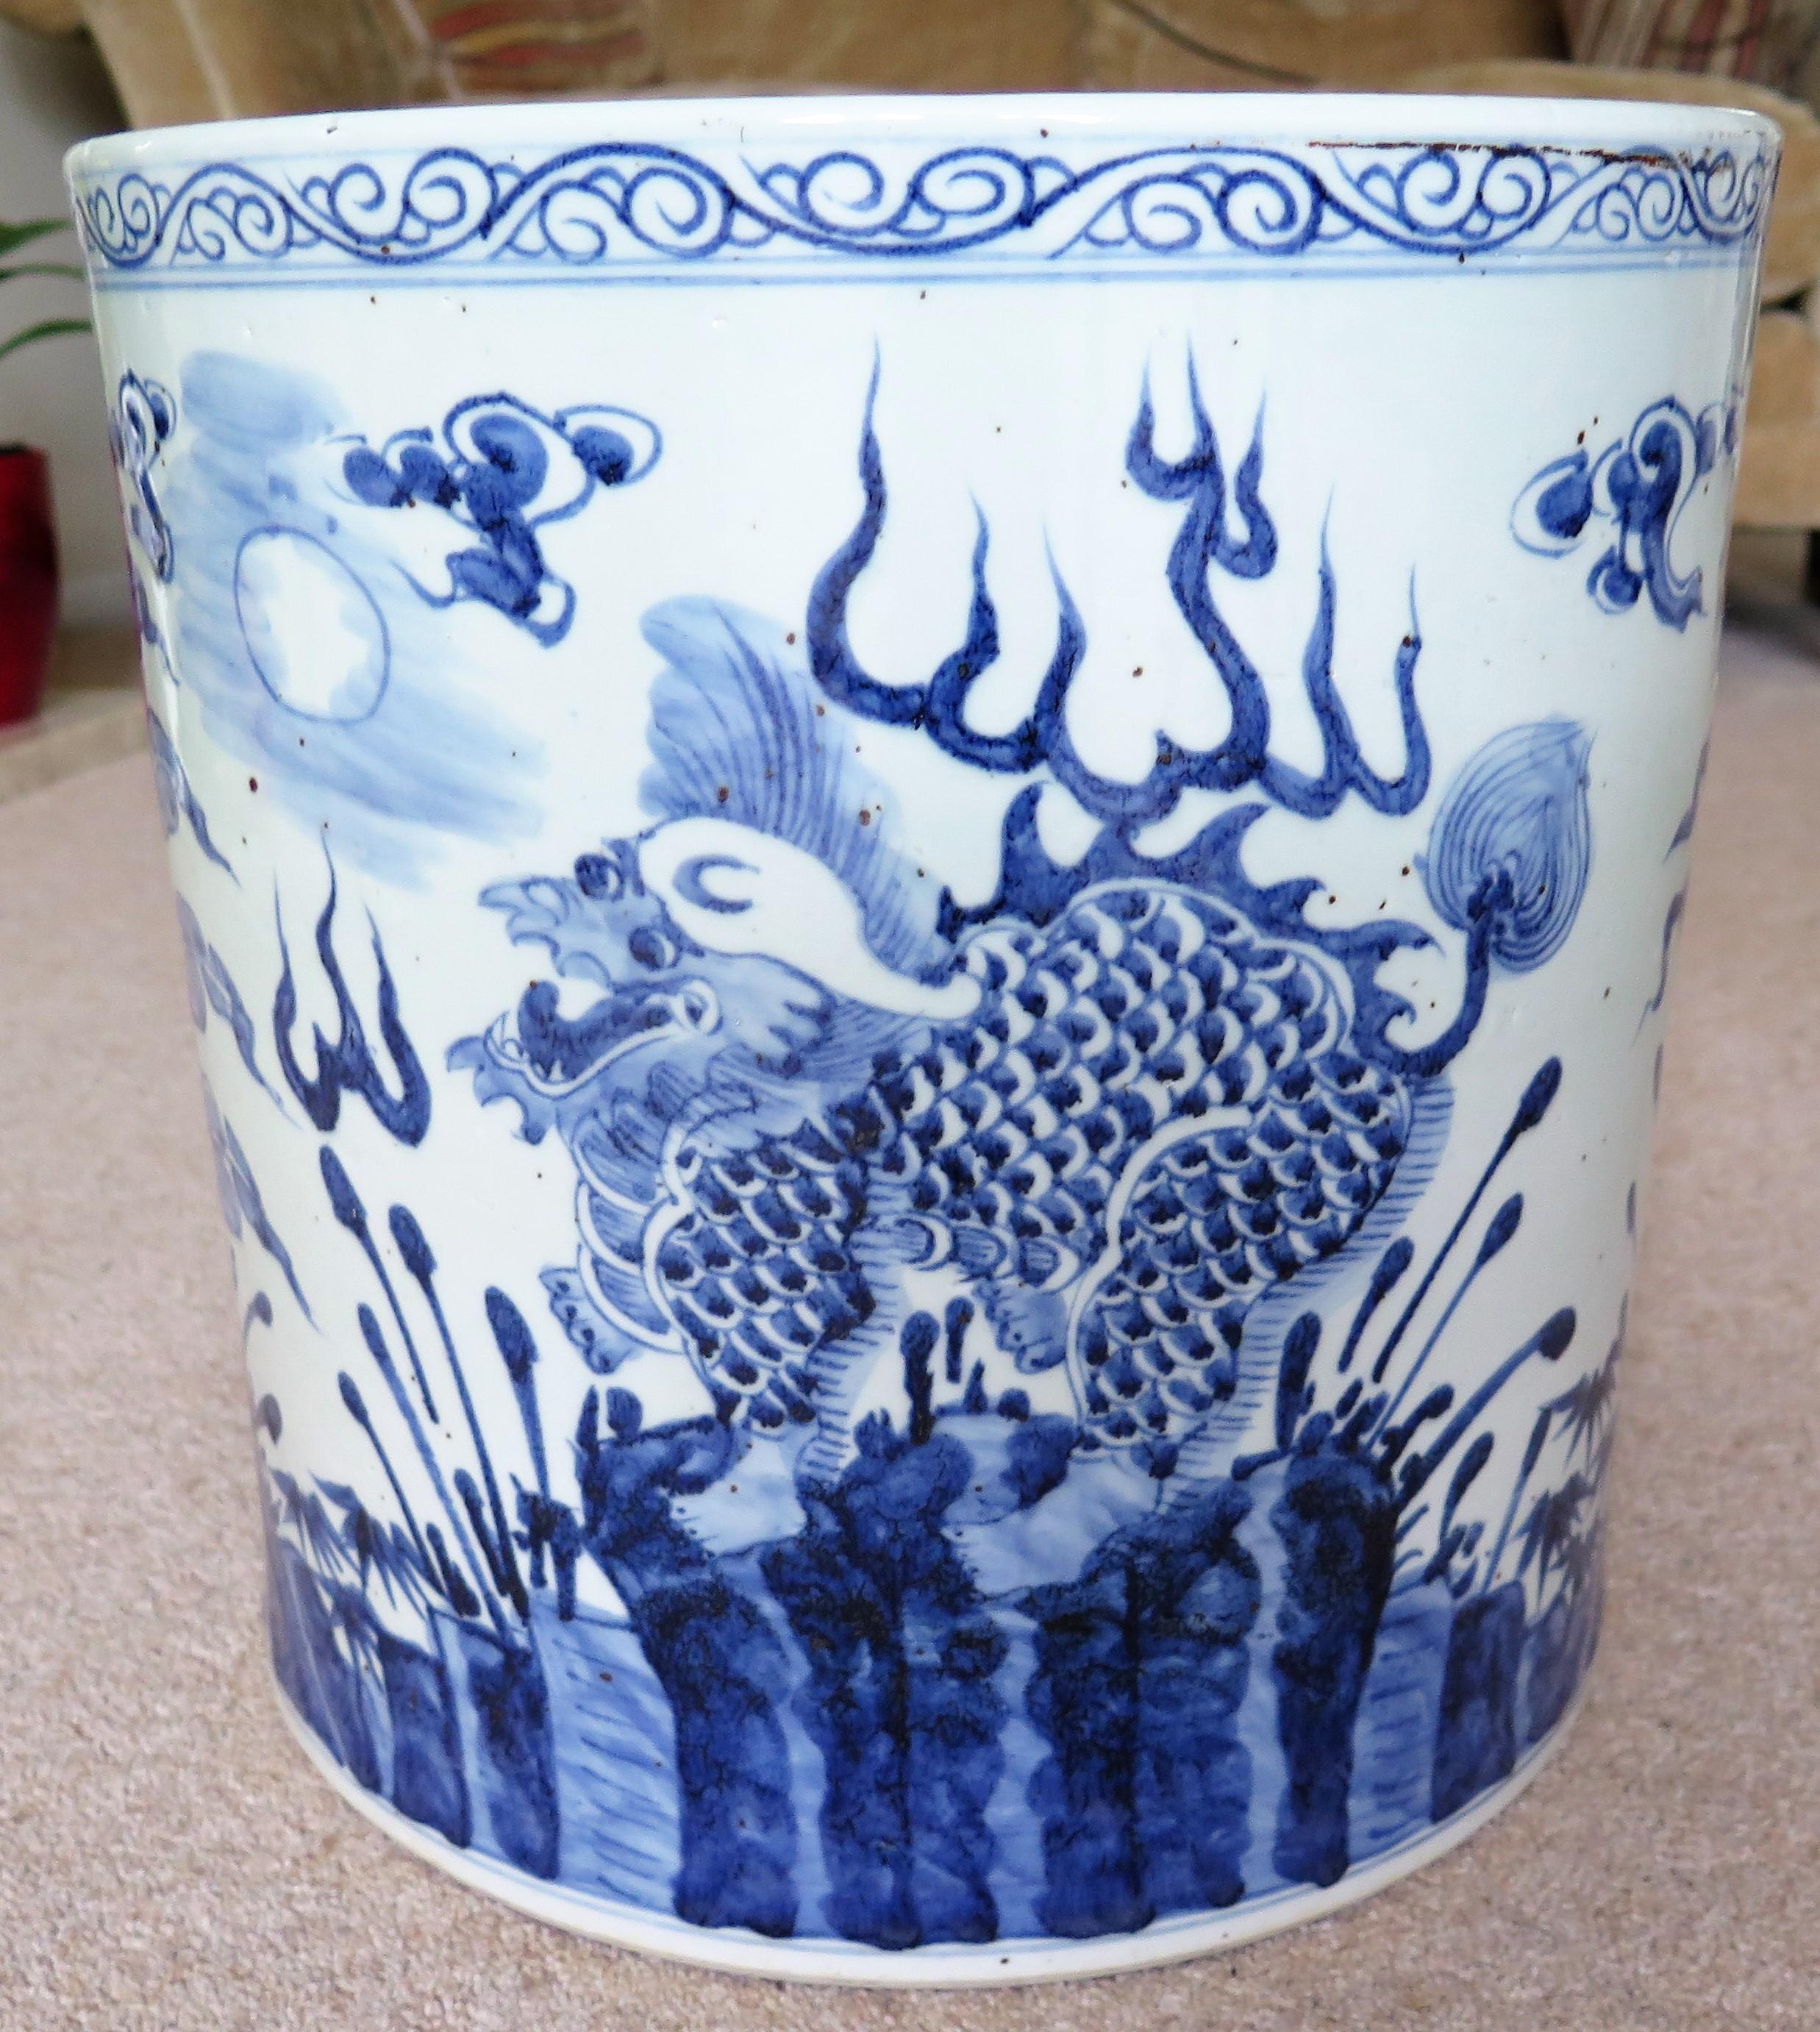 This is a very large Chinese porcelain Jardiniere, Planter, Cache Pot, Vessel or Jar, Hand potted and painted in a striking blue and white pattern and dating to the mid 20th century.

The Jardiniere, vessel or jar has a lovely shape and is hand